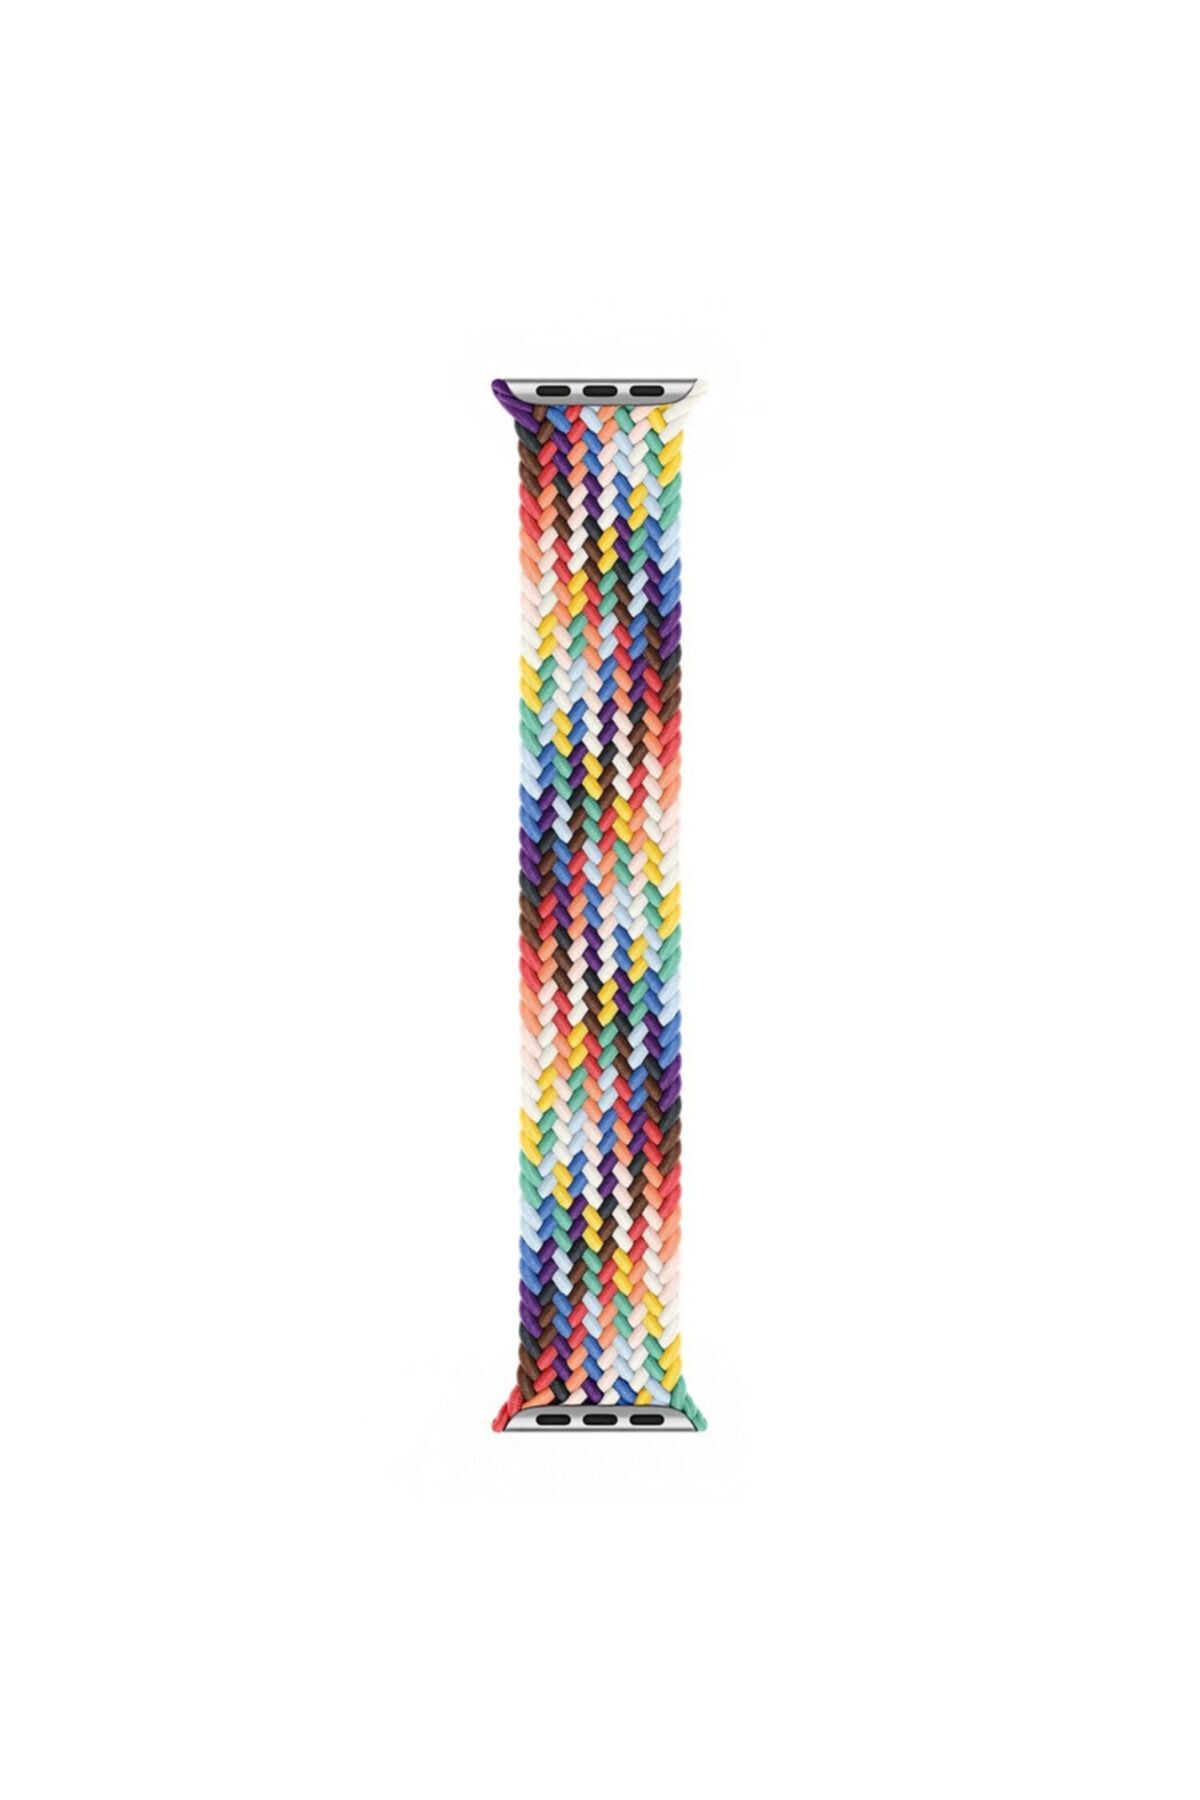 Microsonic Apple Watch Se 40mm Kordon, (small Size, 127mm) Braided Solo Loop Band Pride Edition